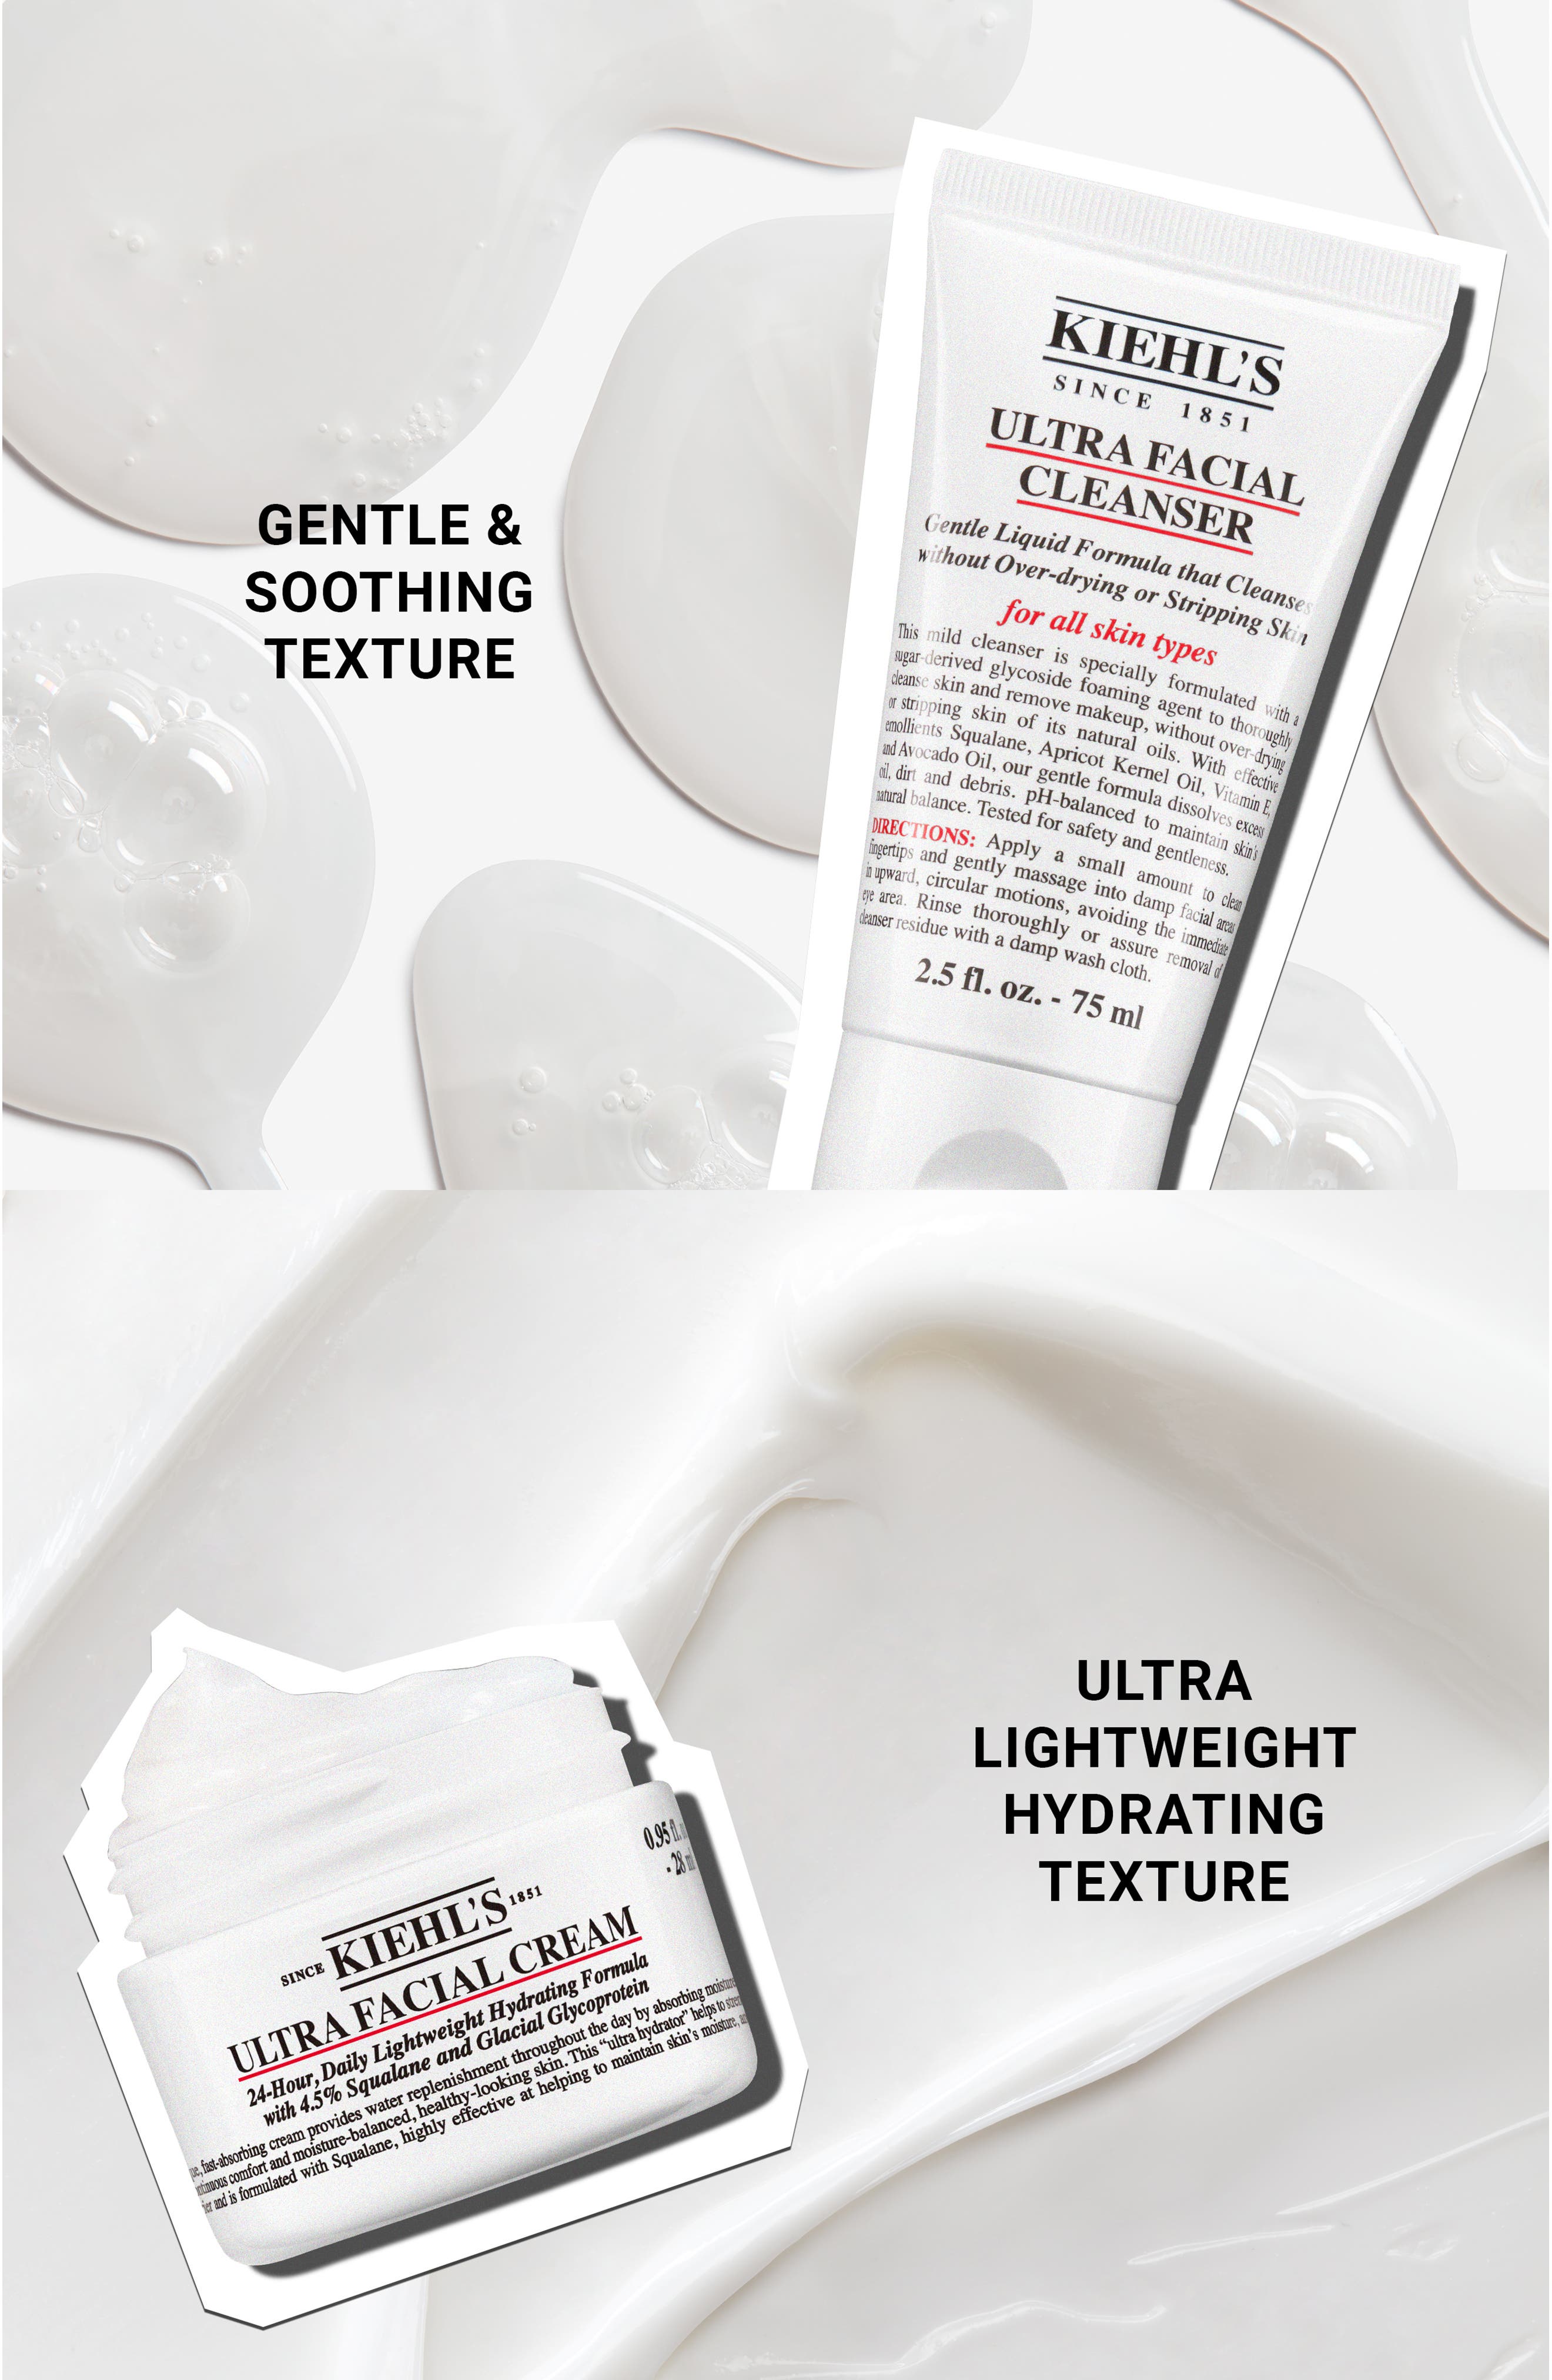 Kiehl's Since 1851 Hydrate All The Way Set $39 Value